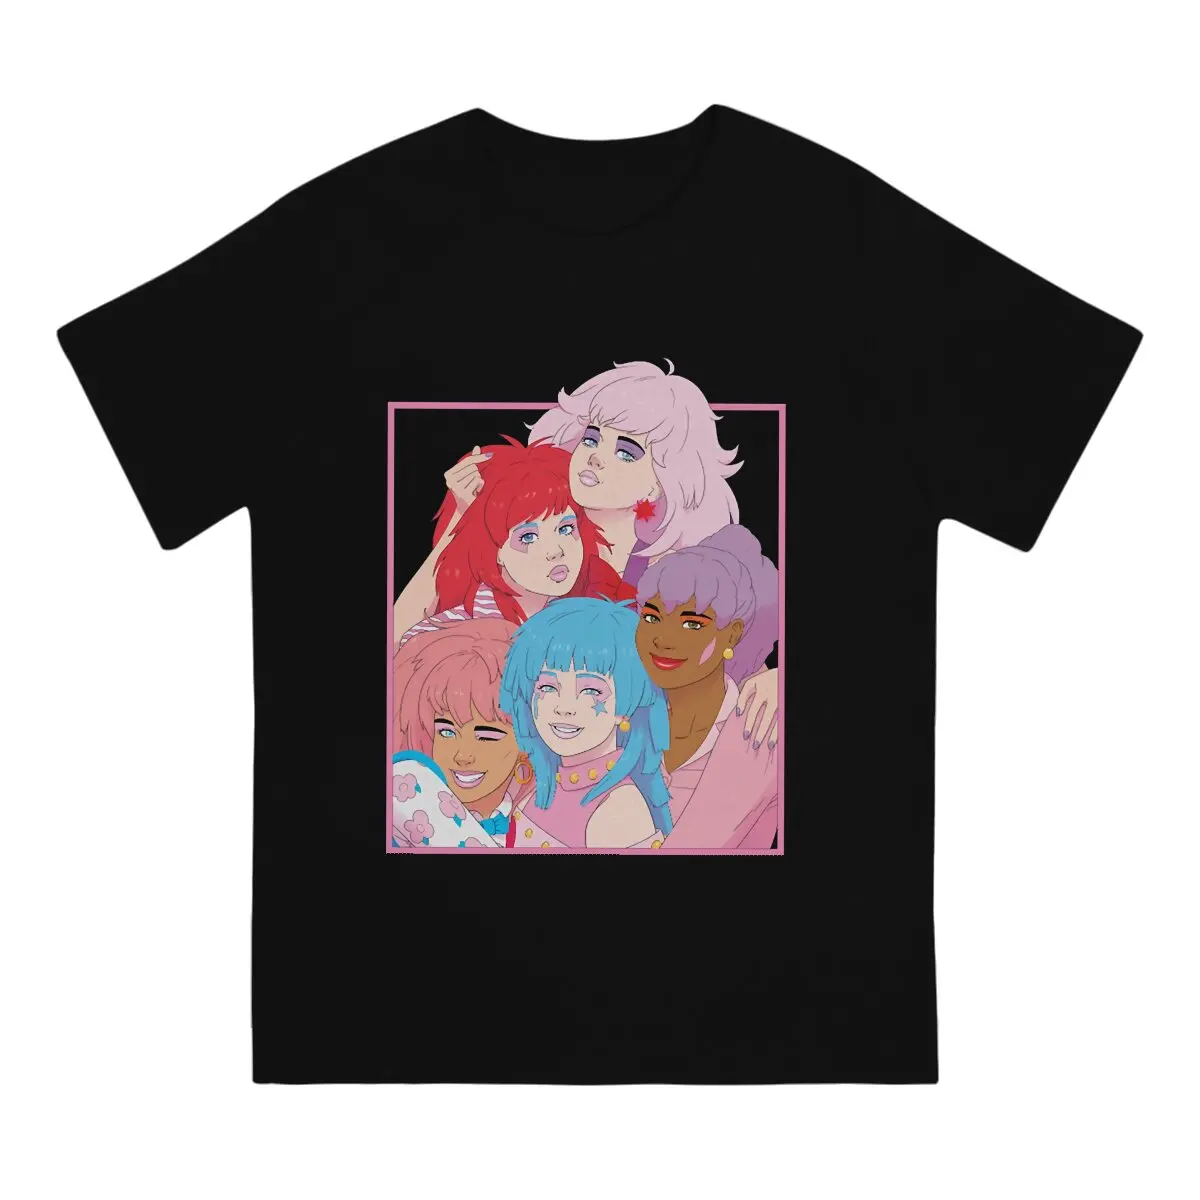 

Photo Essential Men T Shirts Jem And The Holograms TV Awesome Tee Shirt Short Sleeve Crewneck T-Shirt 100% Cotton Gift Idea